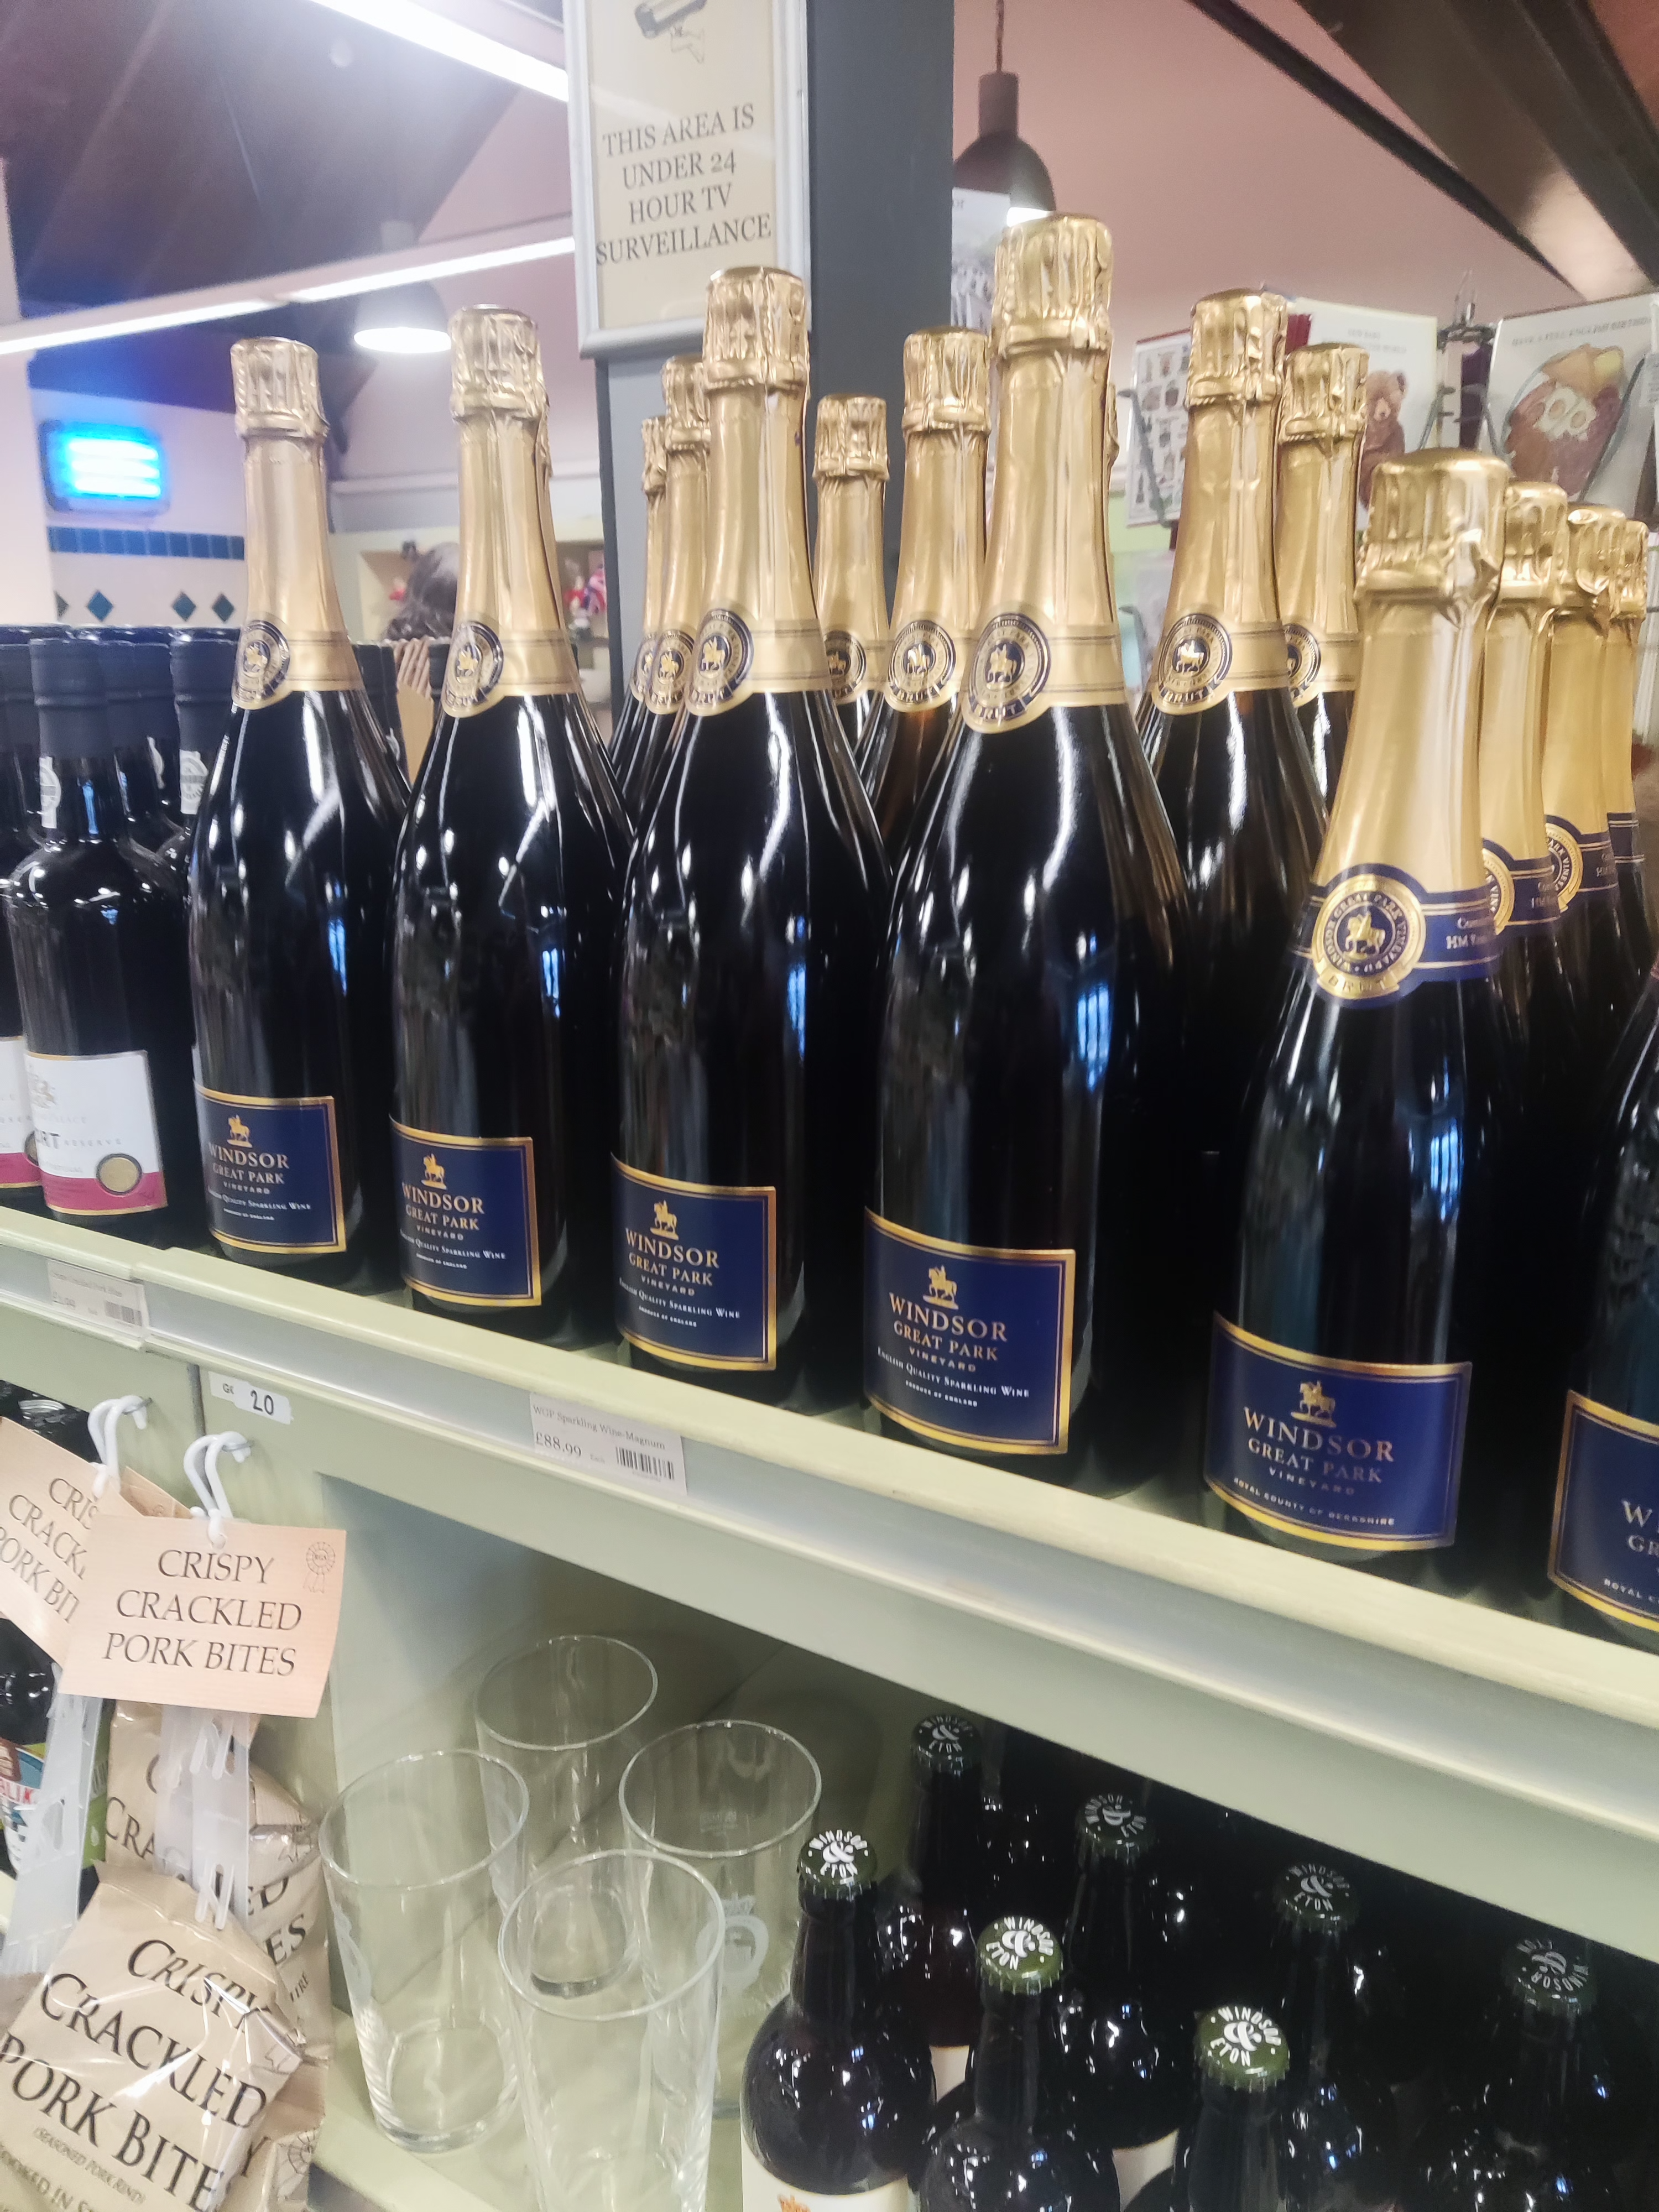 Windsor’s sparkling wine goes for a princly sum of £88.99